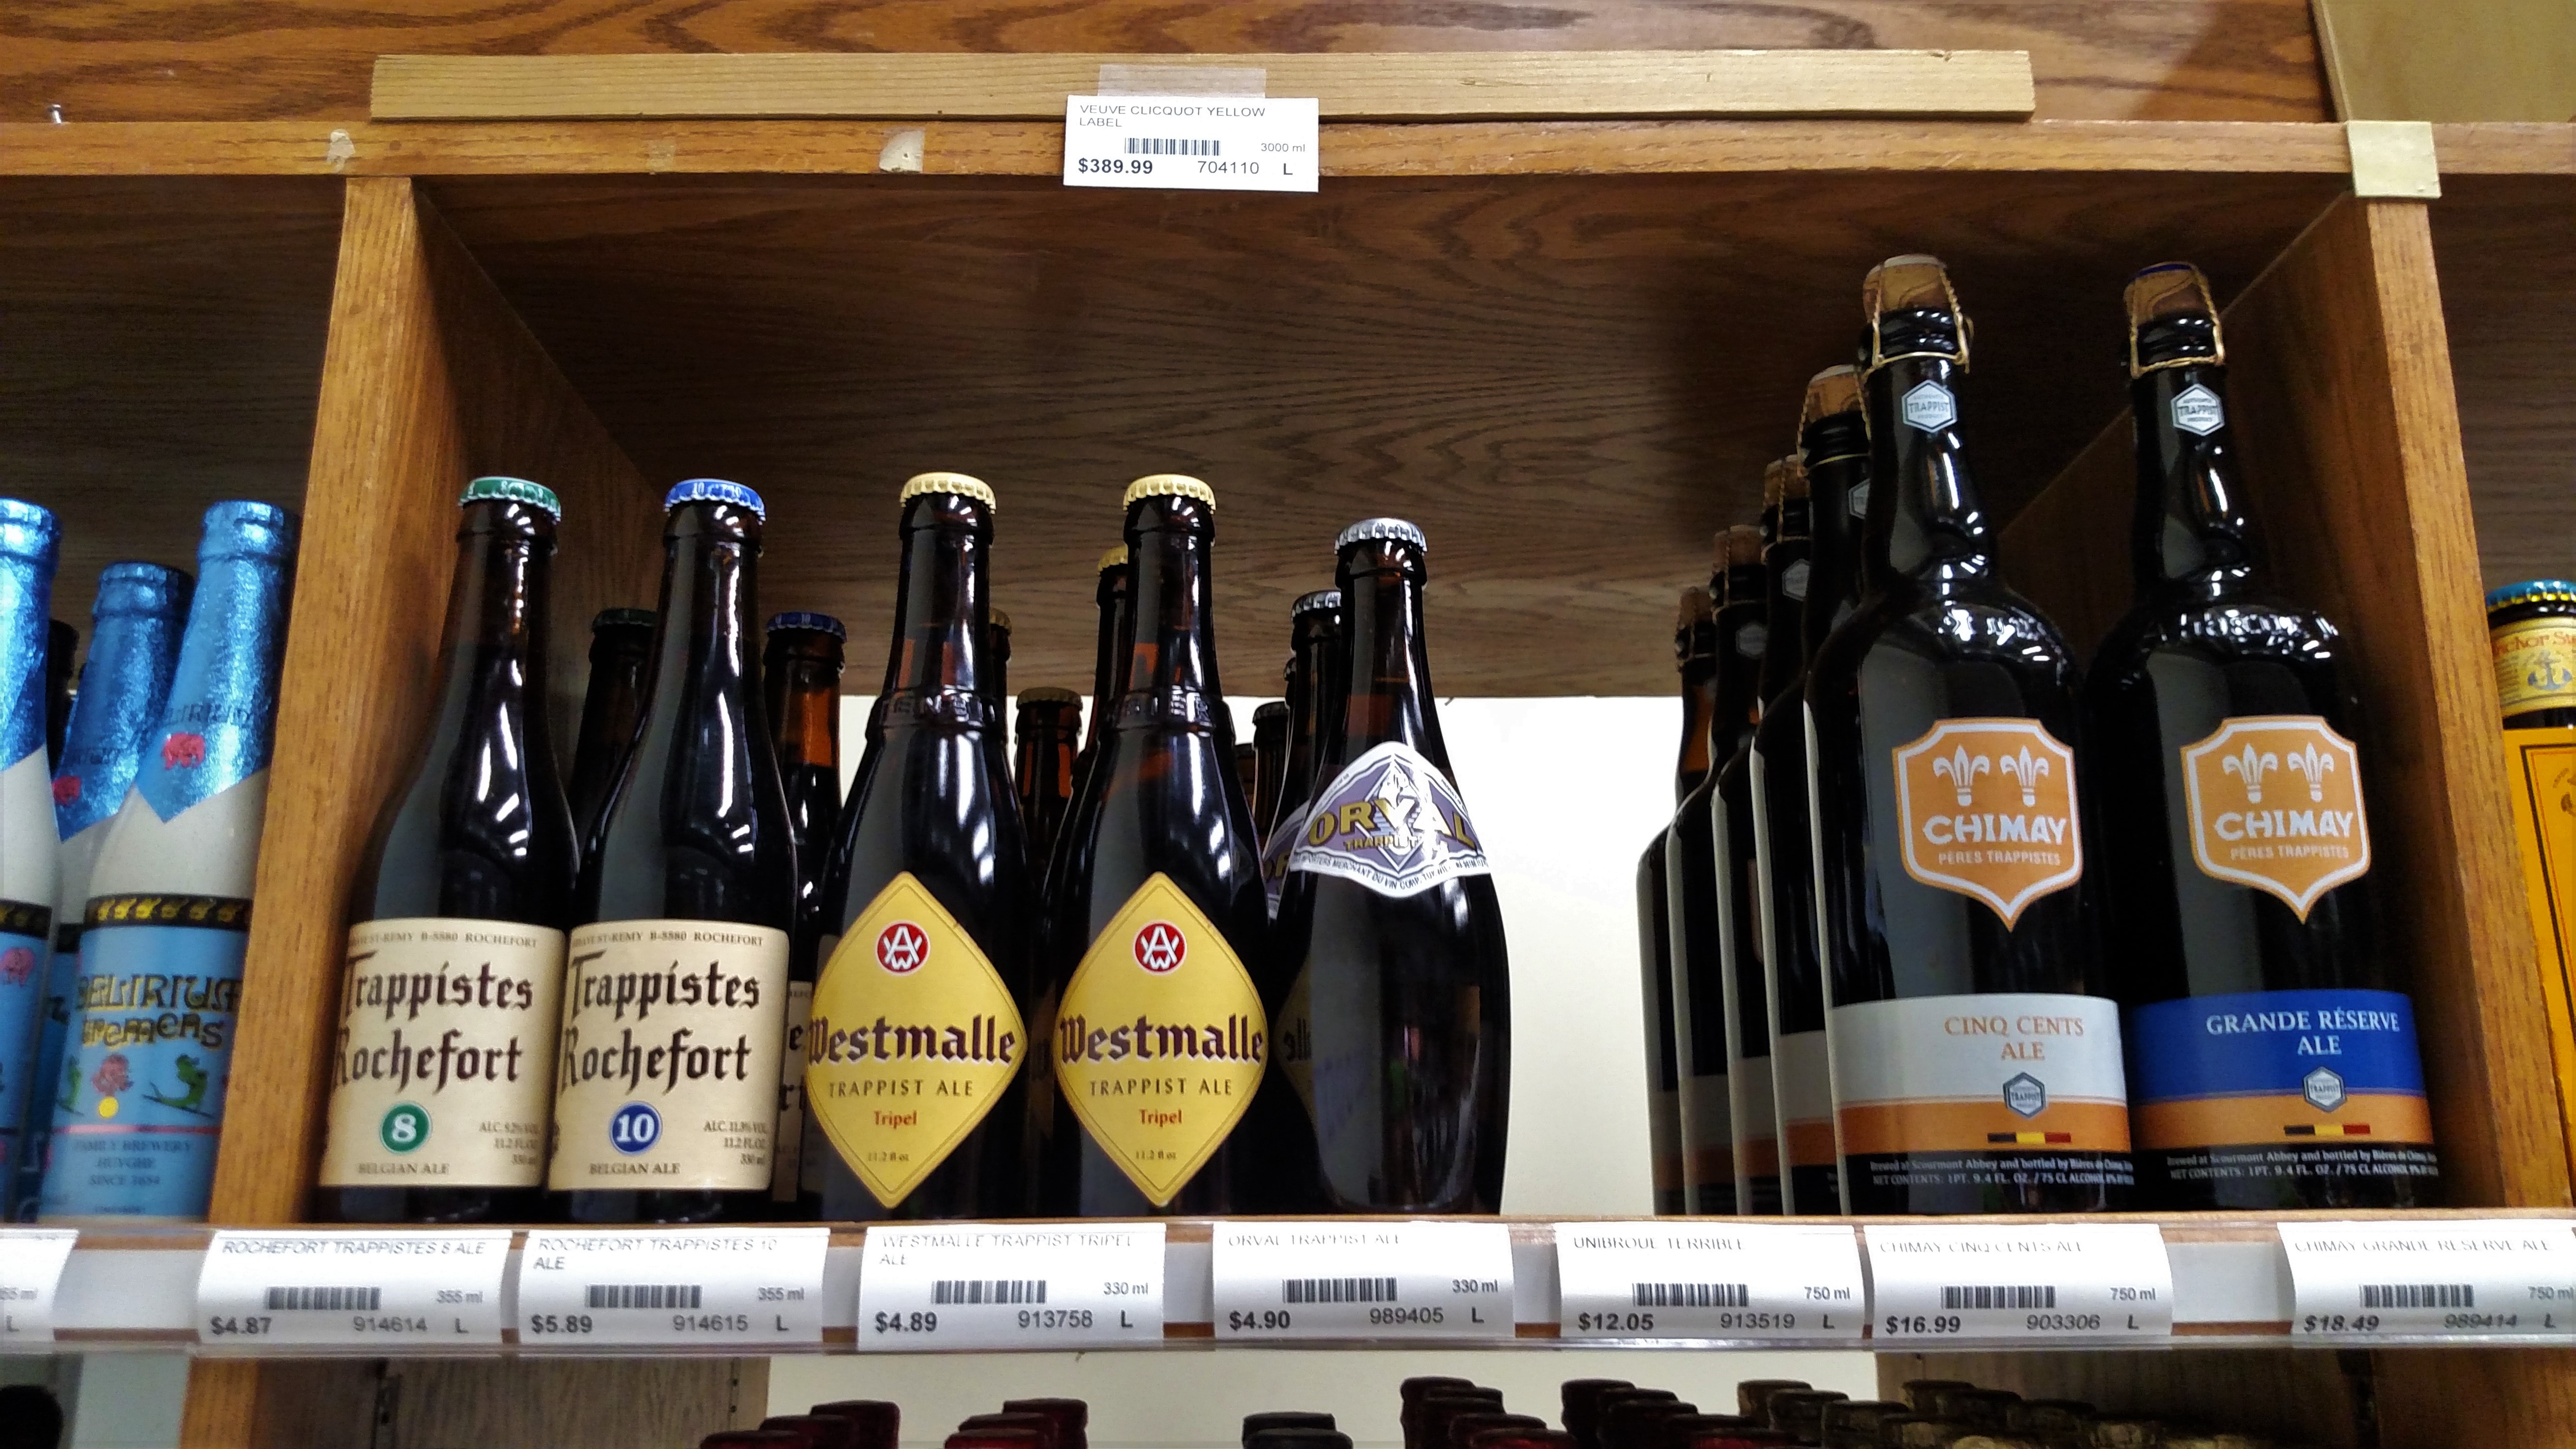 5 Interesting Facts About Trappist Beer